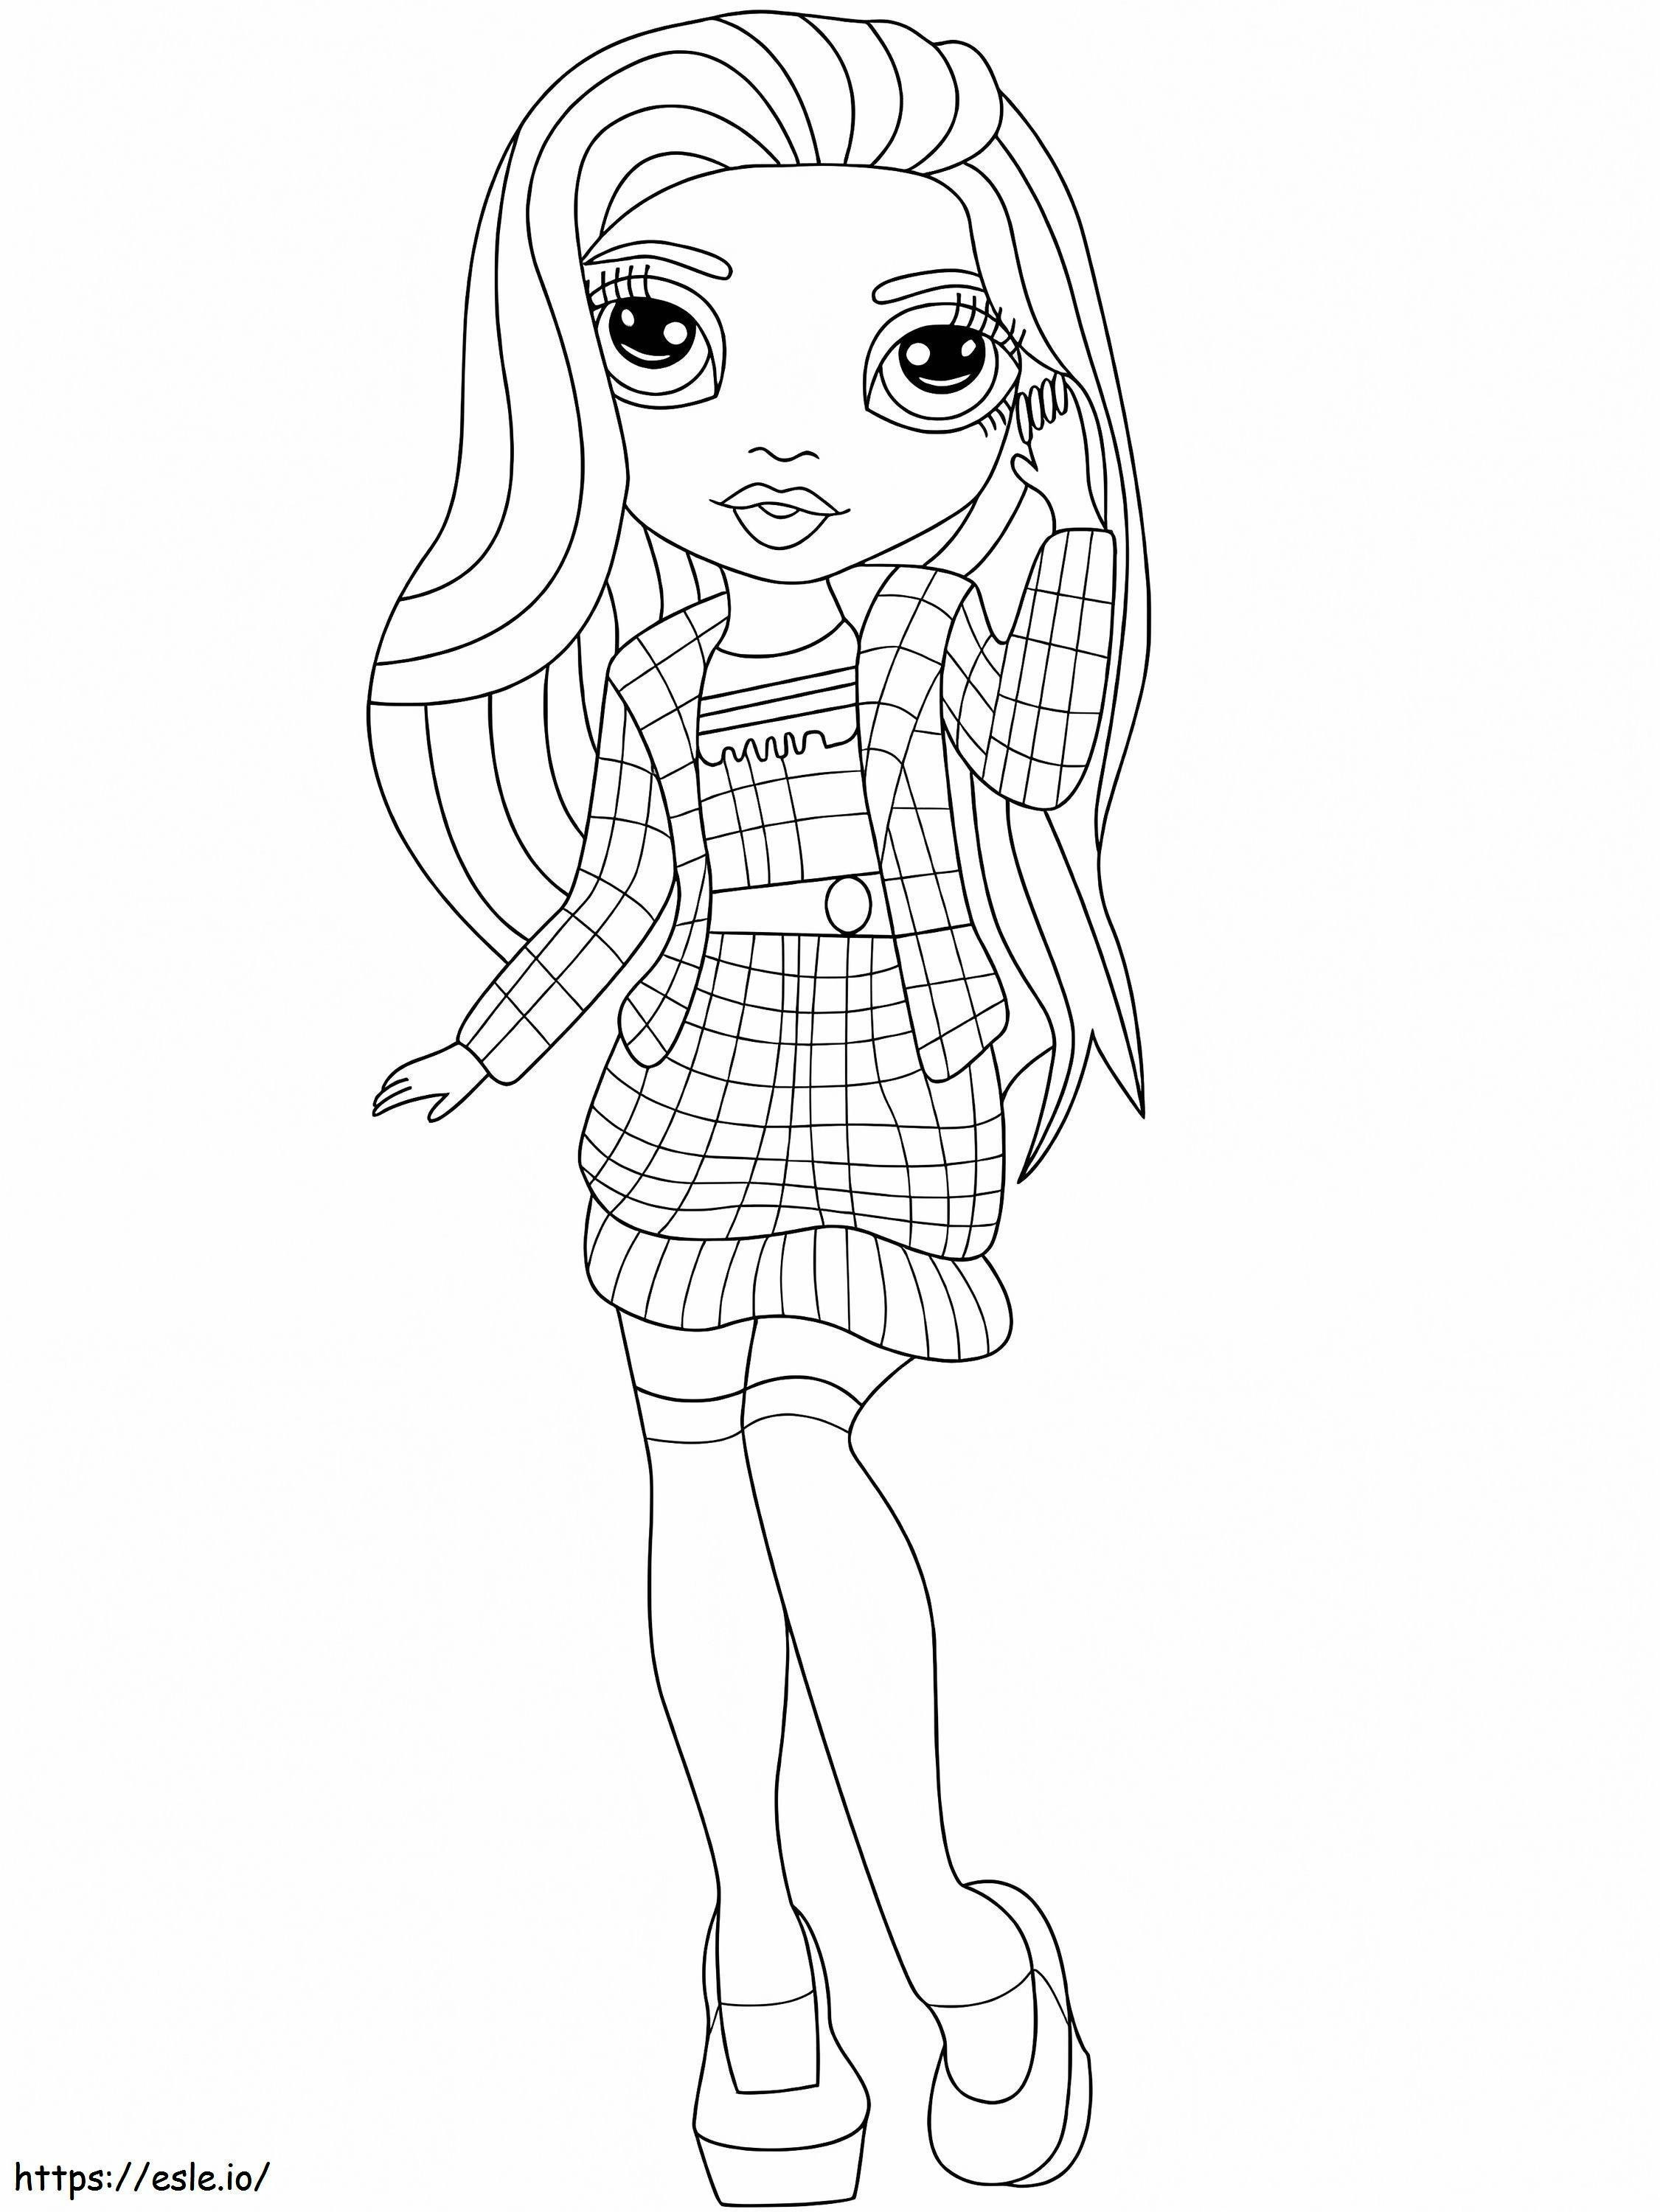 Sheryl Meyer Rainbow High coloring page